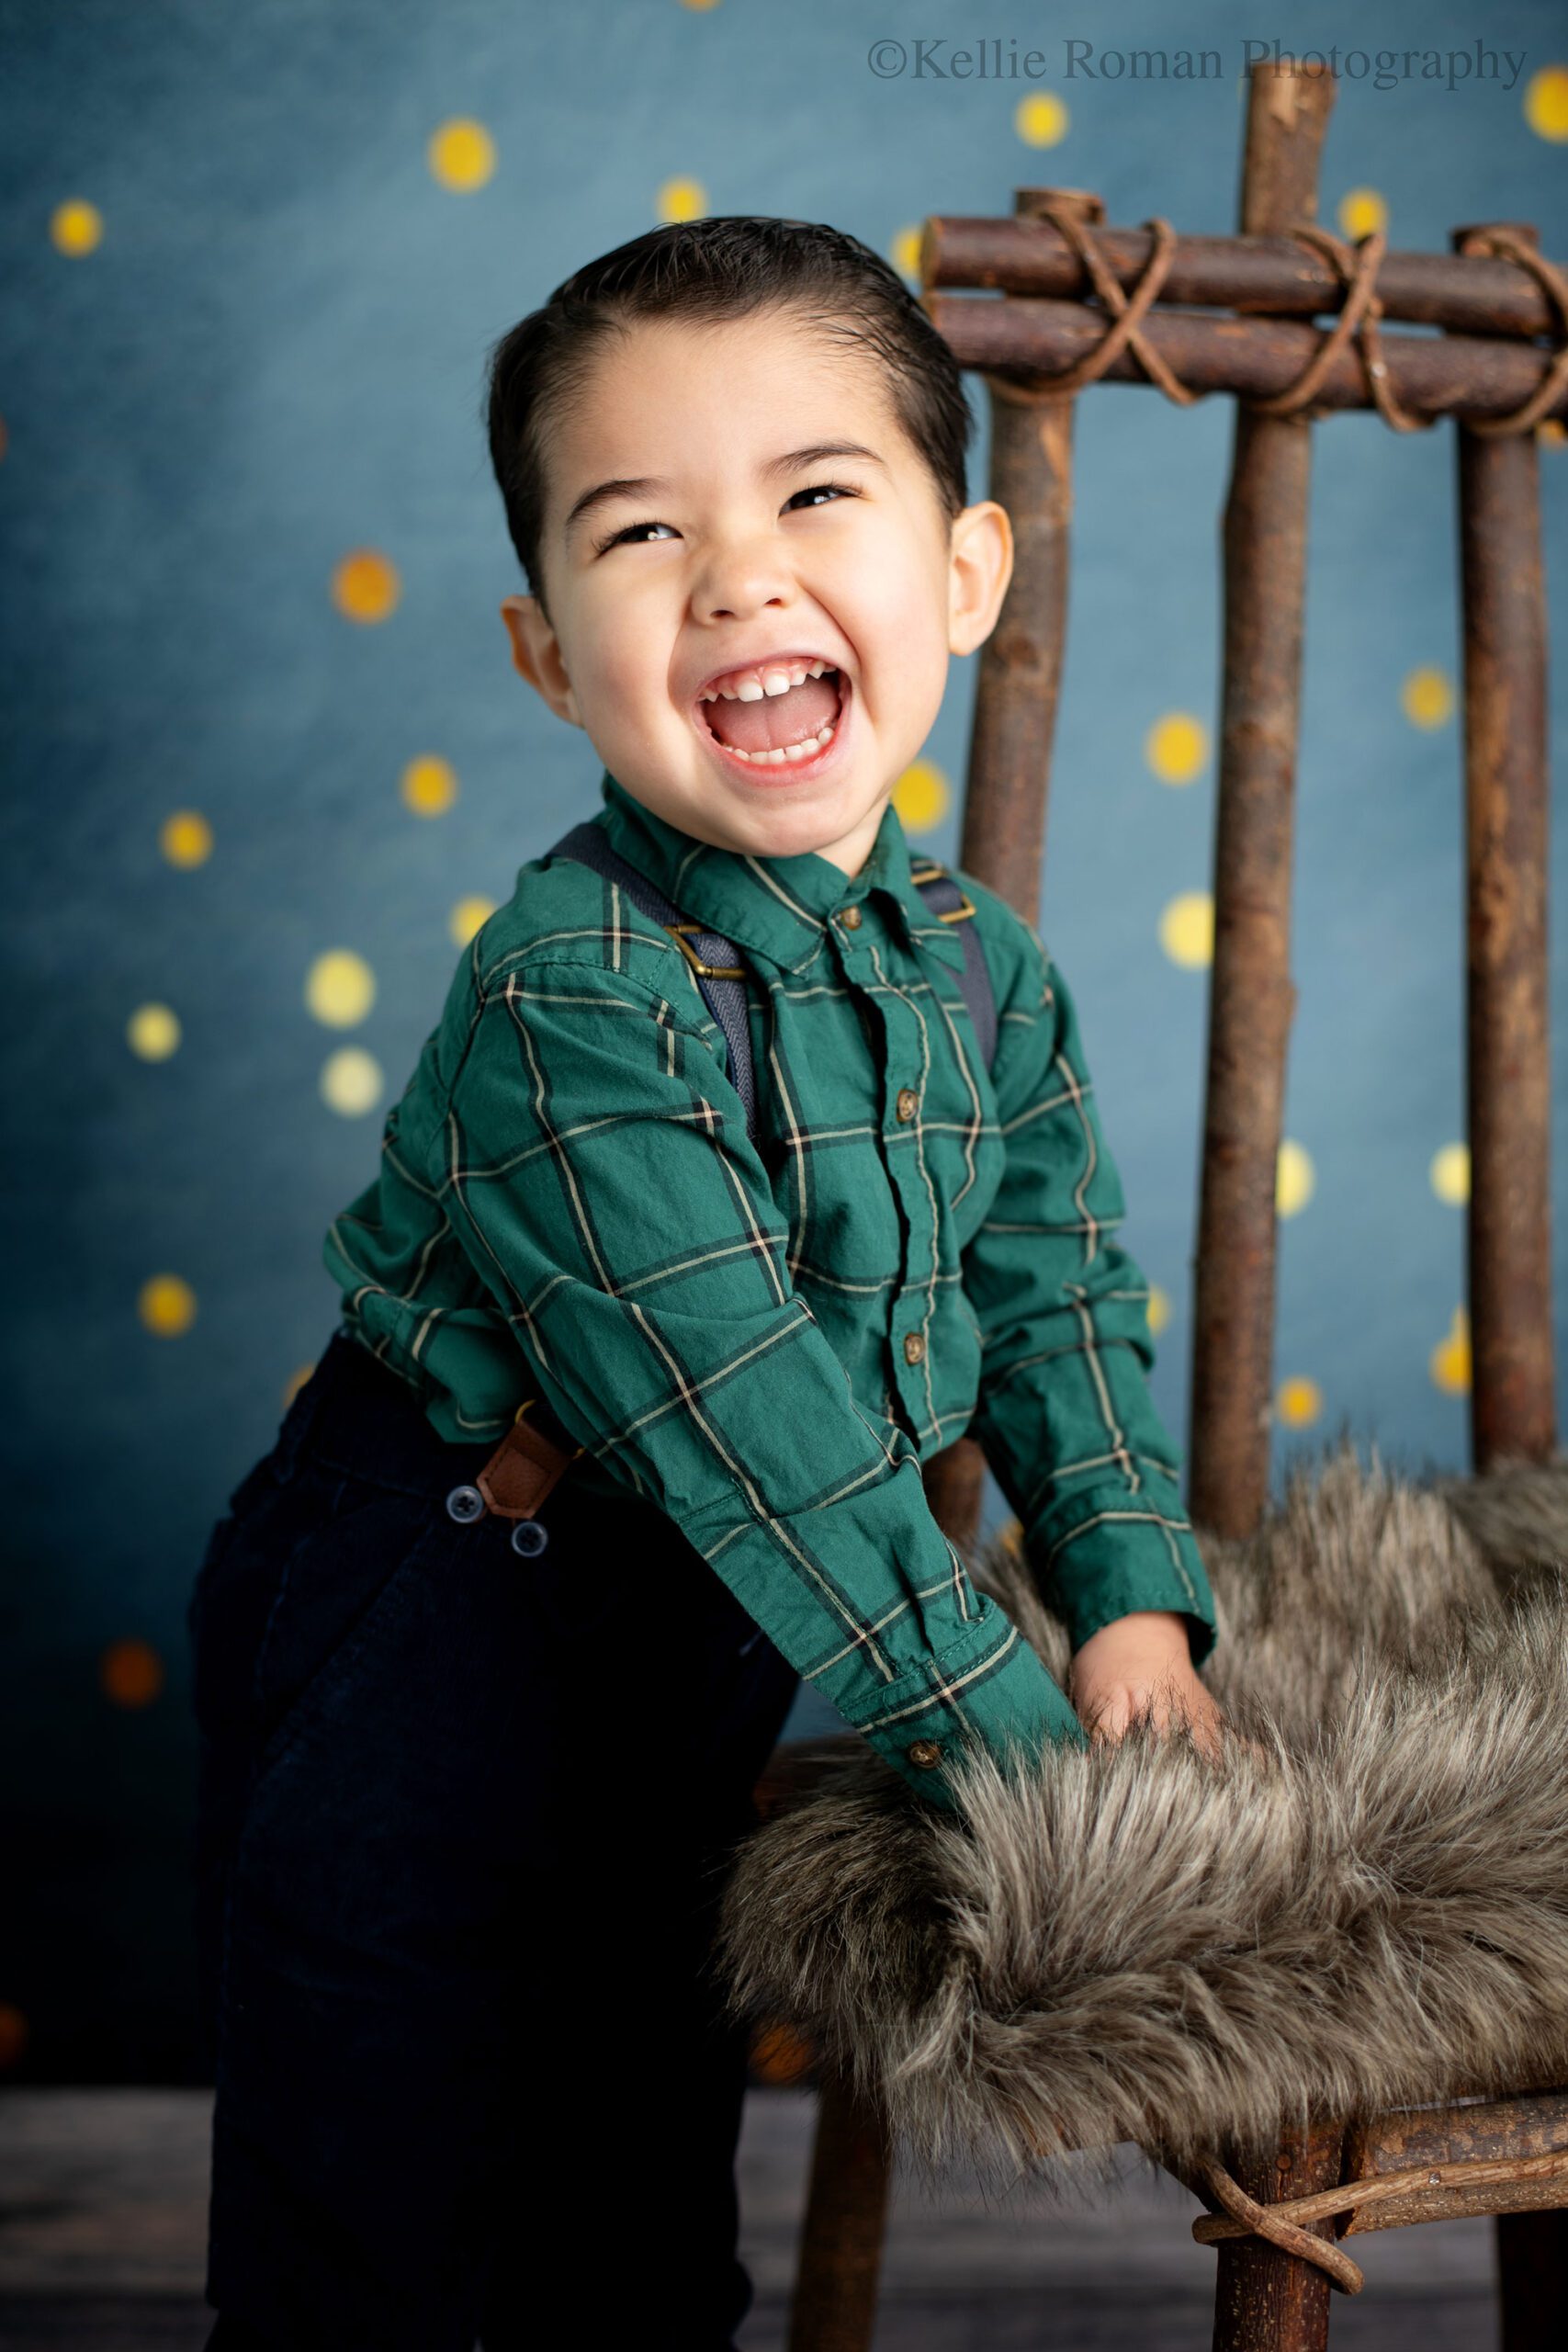 birthday photographer milwaukee. a young boy is looking to the side and smiling really big. he has a green flannel shirt on with navy suspenders and corduroy pants. he's leaning on a wood chair with brown fur over it. the backdrop is navy navy with gold polka dots. 